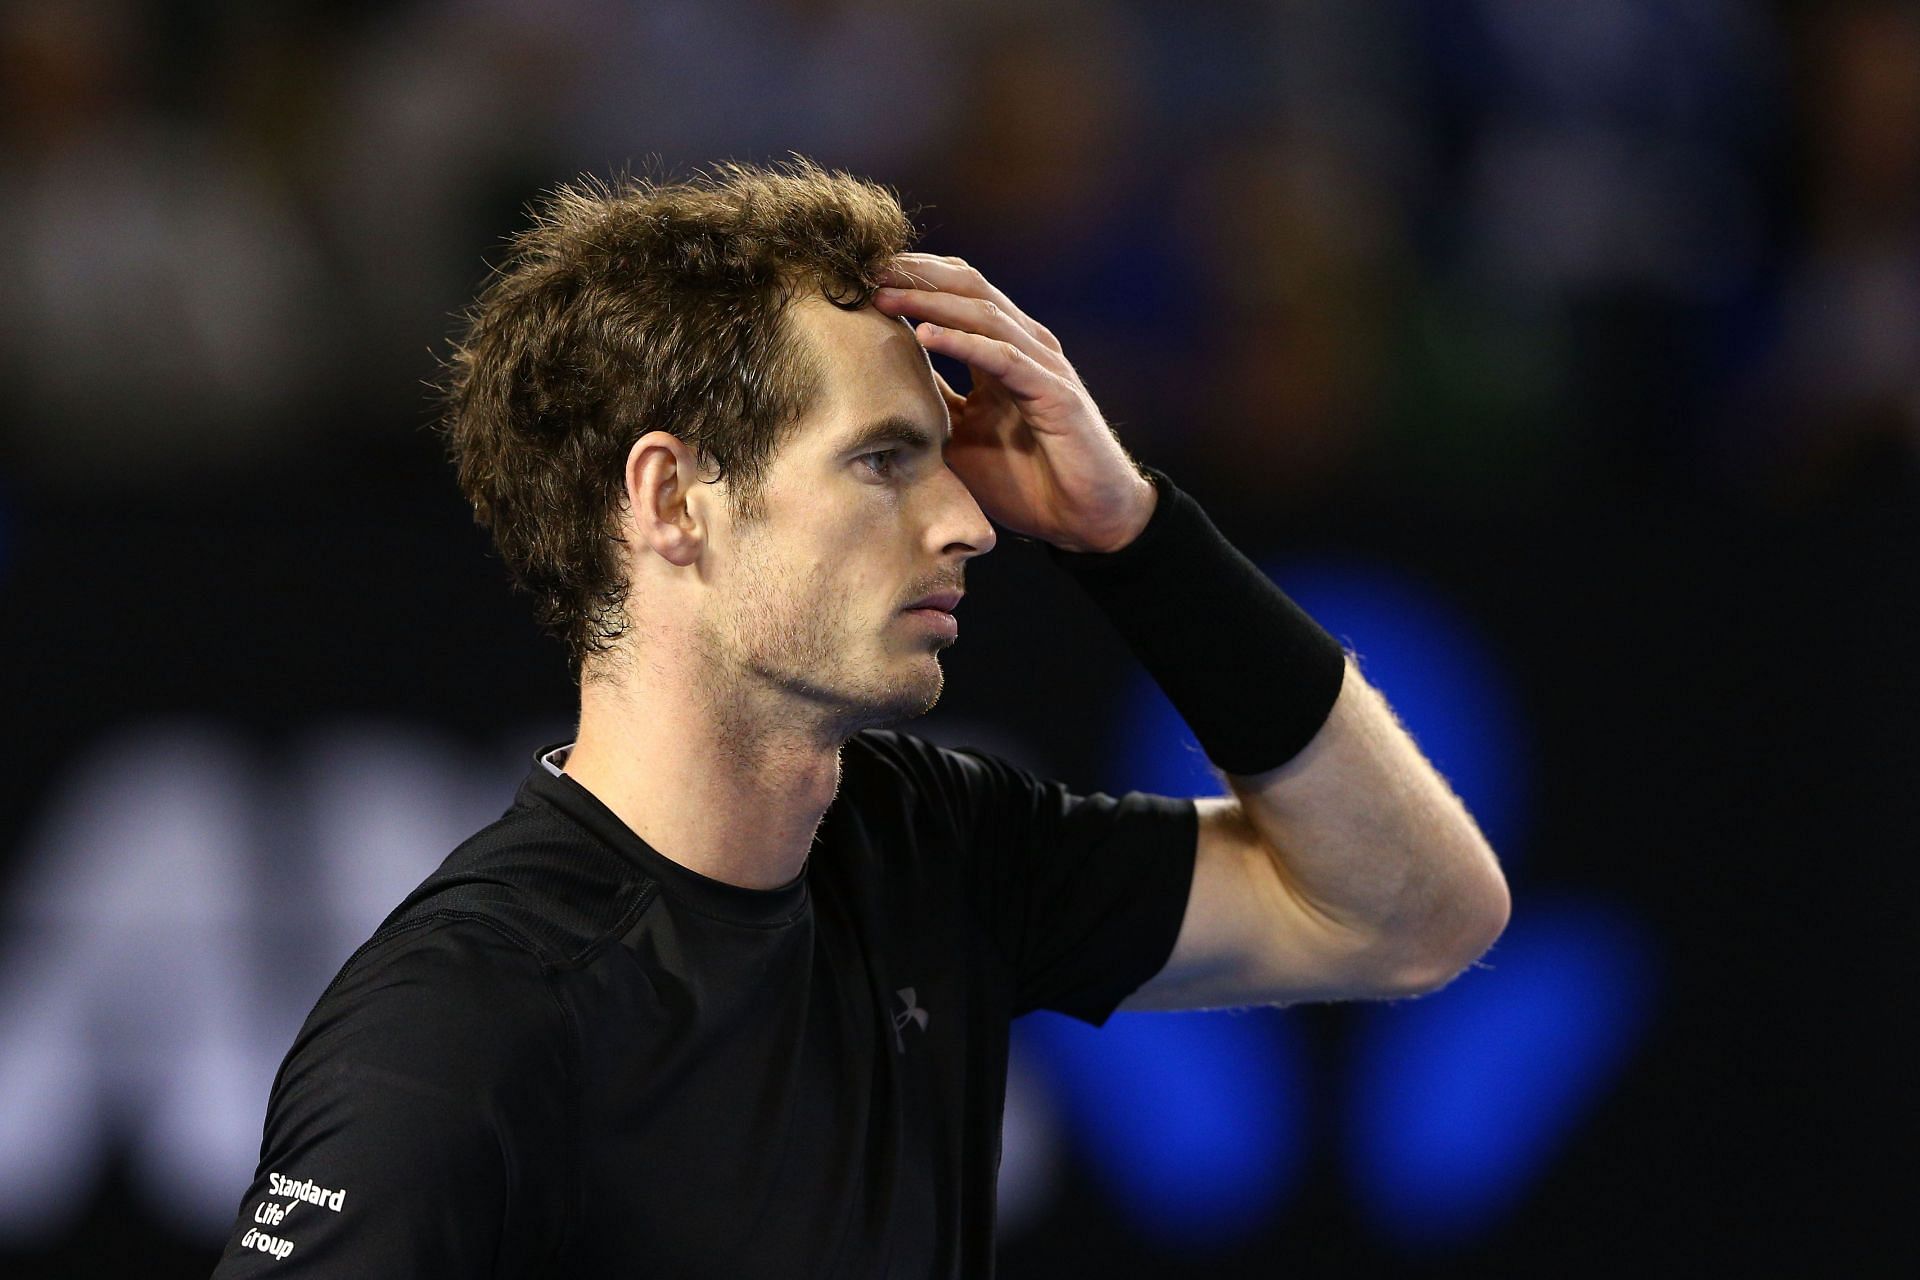 Andy Murray at the 2015 Australian Open